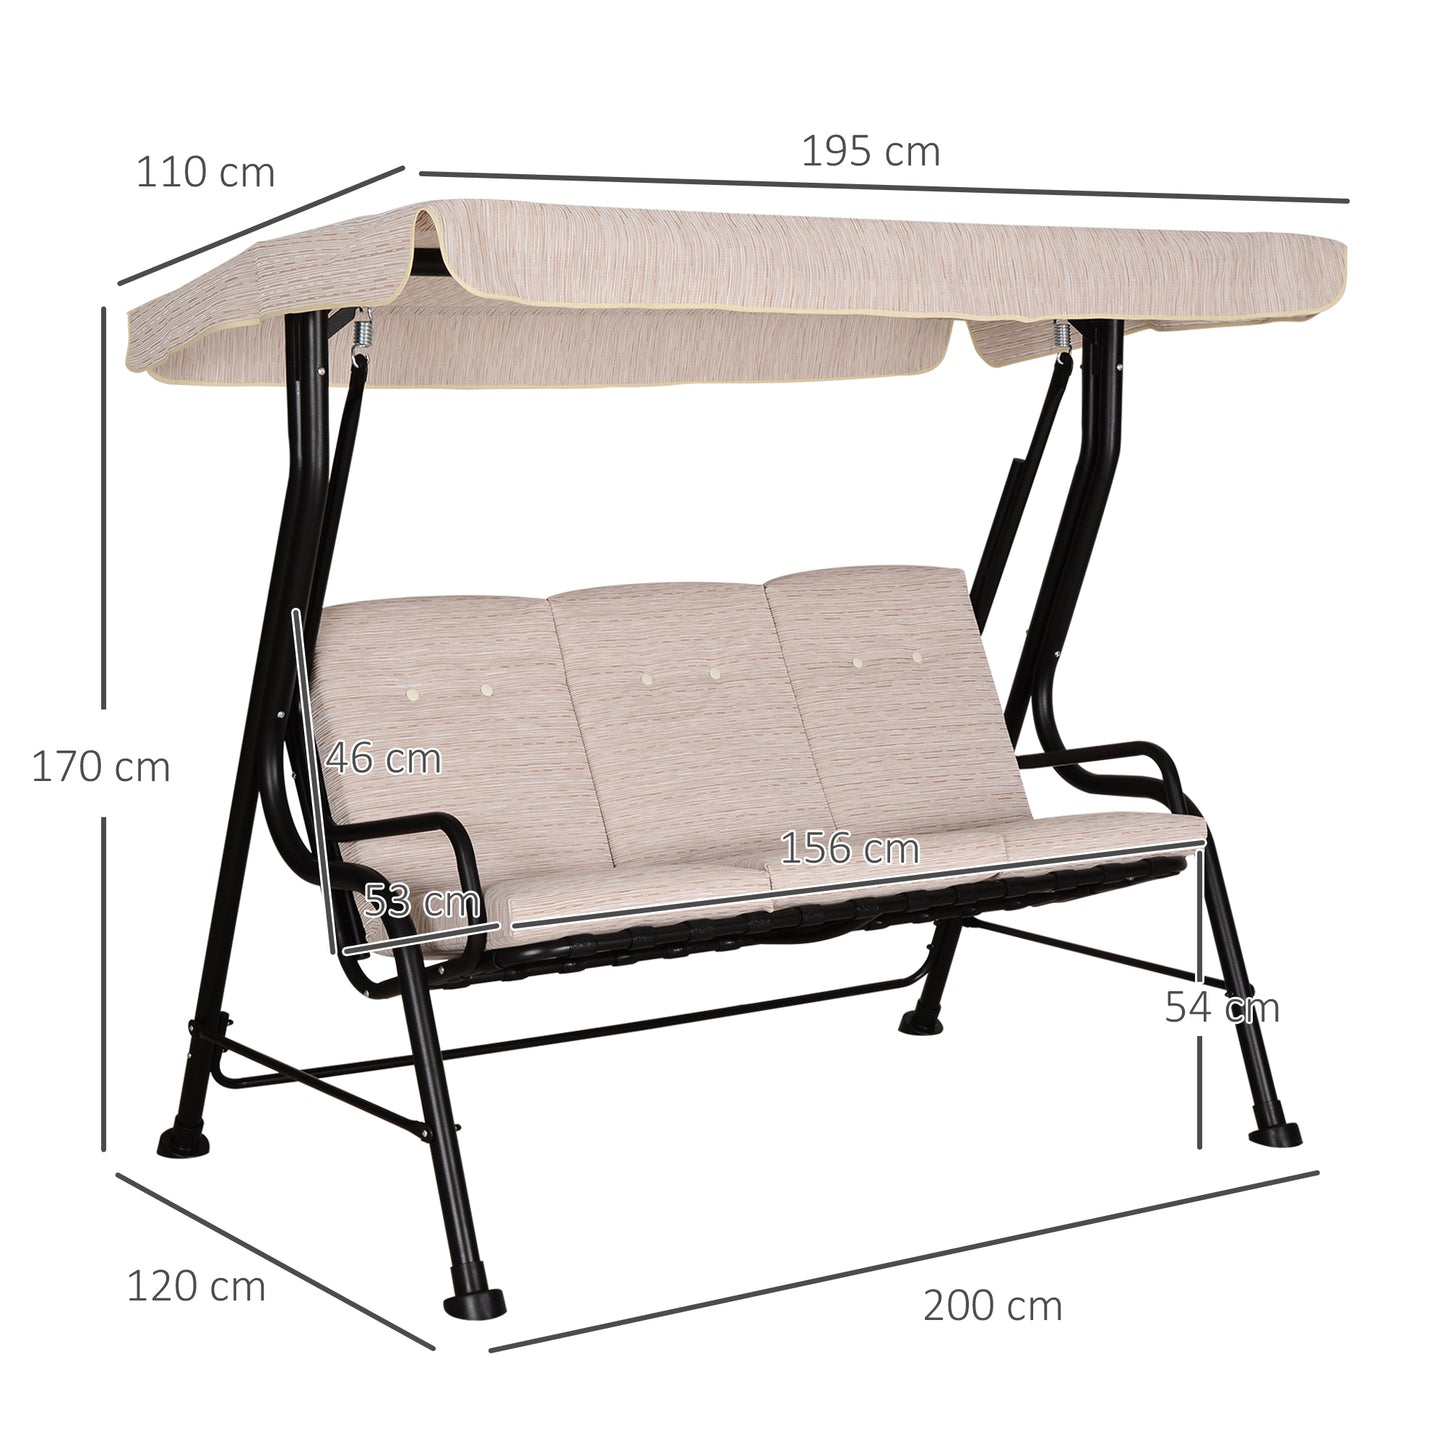 Outsunny 3 Seater Outdoor Garden Swing Chairs Thick Padded Seat Hammock Canopy Porch Patio Bench Bed - Beige